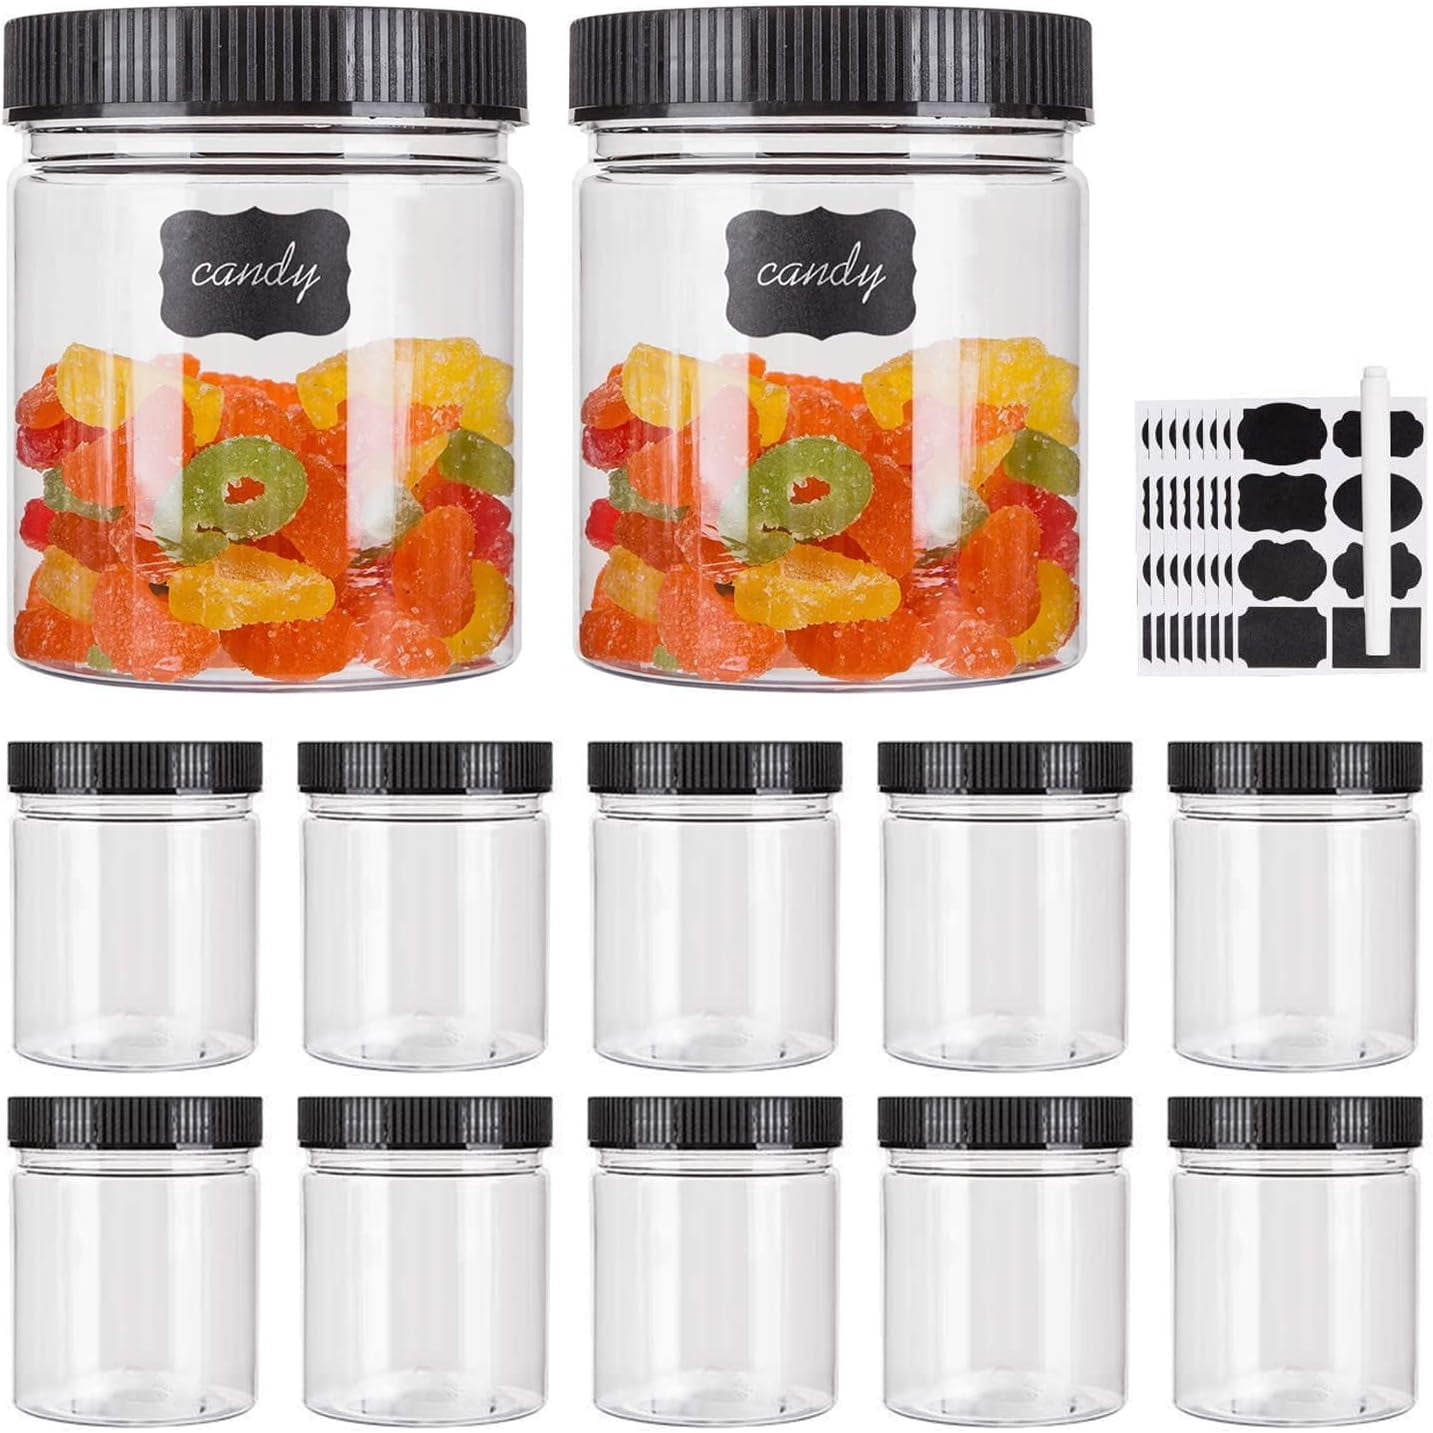 Tanlade 50 Pcs 12 Oz Square Plastic Jars with Aluminum Lids lightweight  Wide Mouth Candy Jars Storage Containers with Screw on Lids Airtight for